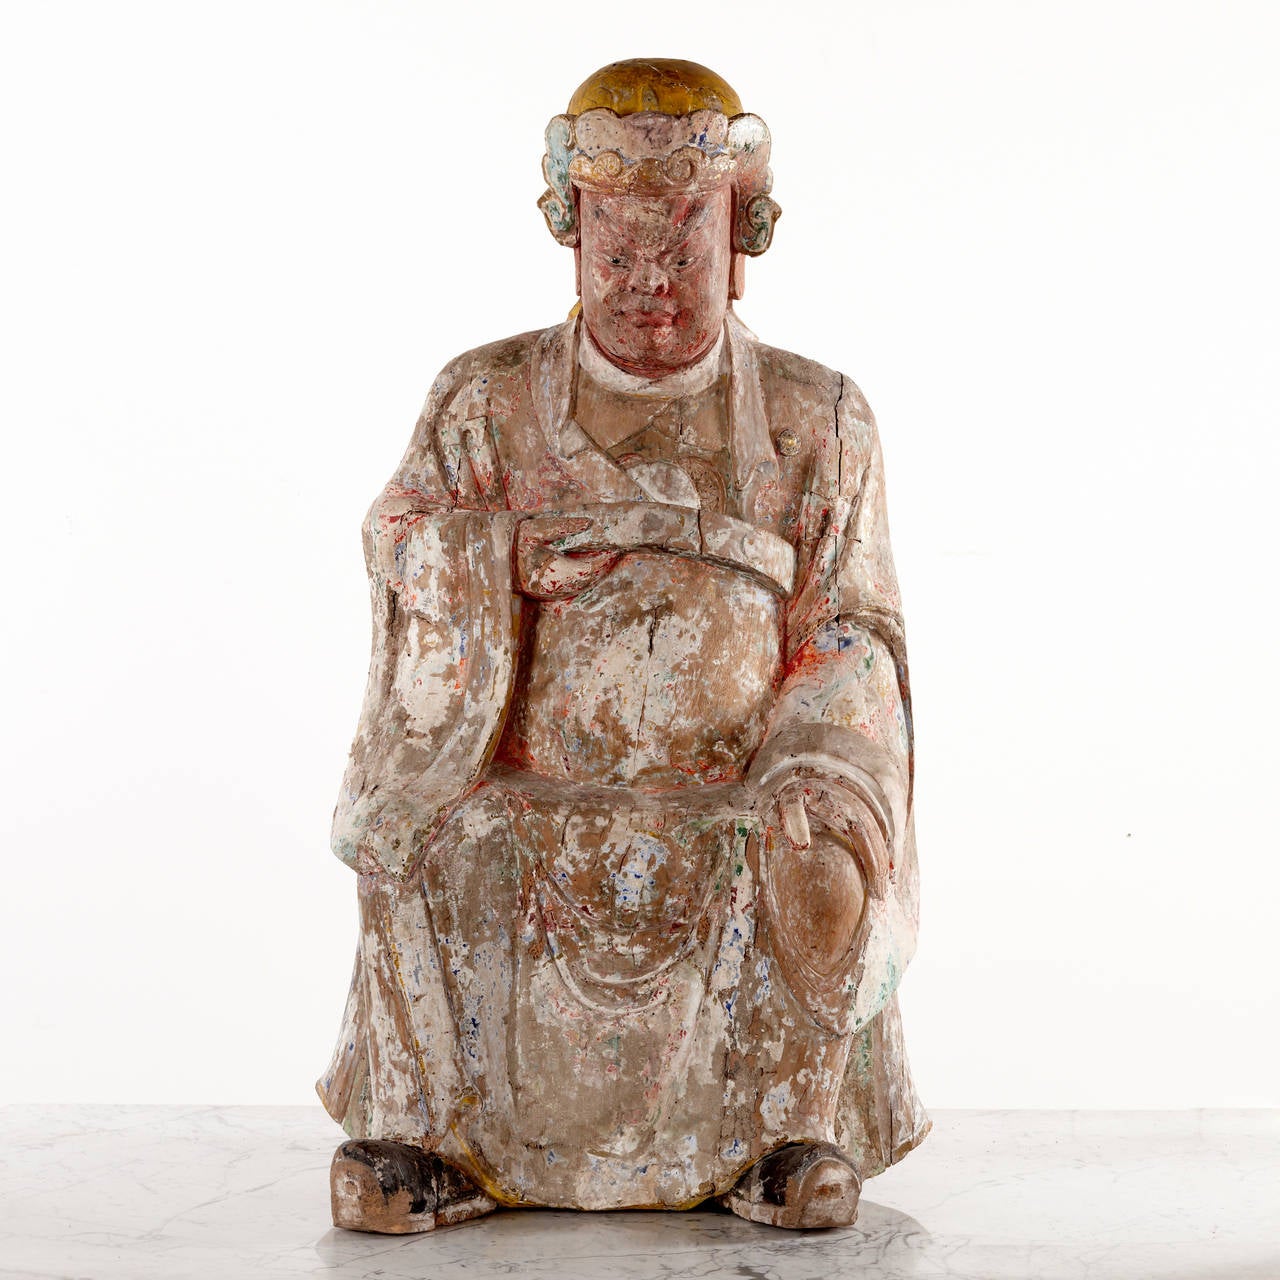 Large (98 cm) woodcut official figurine with remaining pieces of polychrome lacquer. Occur untouched with great patina. From early 19th century. The figure is originated in the province of Shanxi.